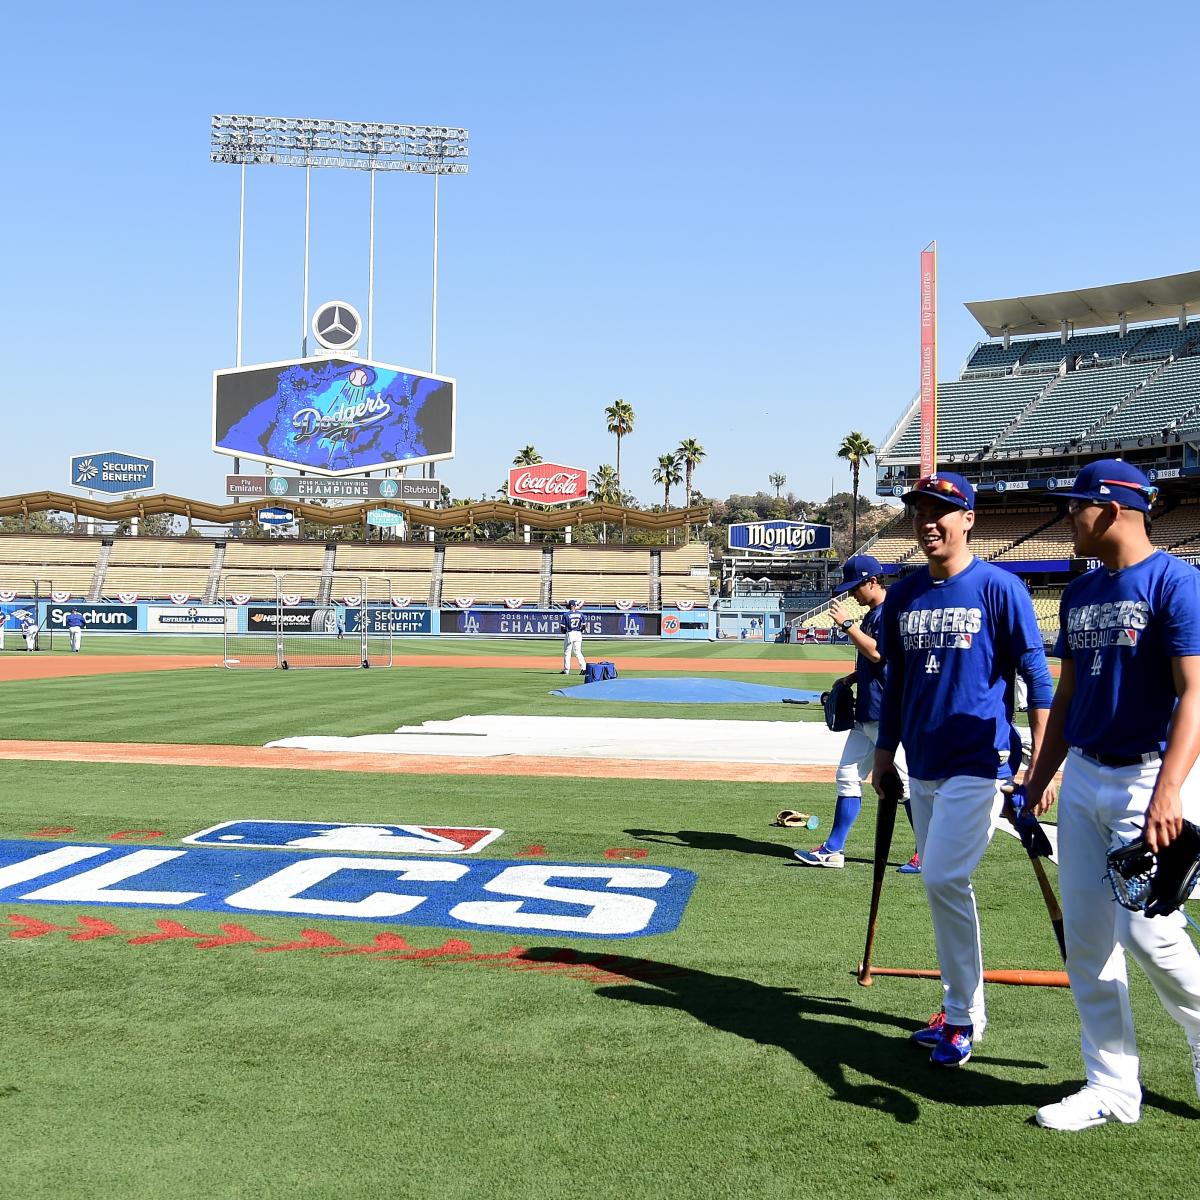 Cubs vs. Dodgers NLCS Game 4 Live Score and Highlights News, Scores